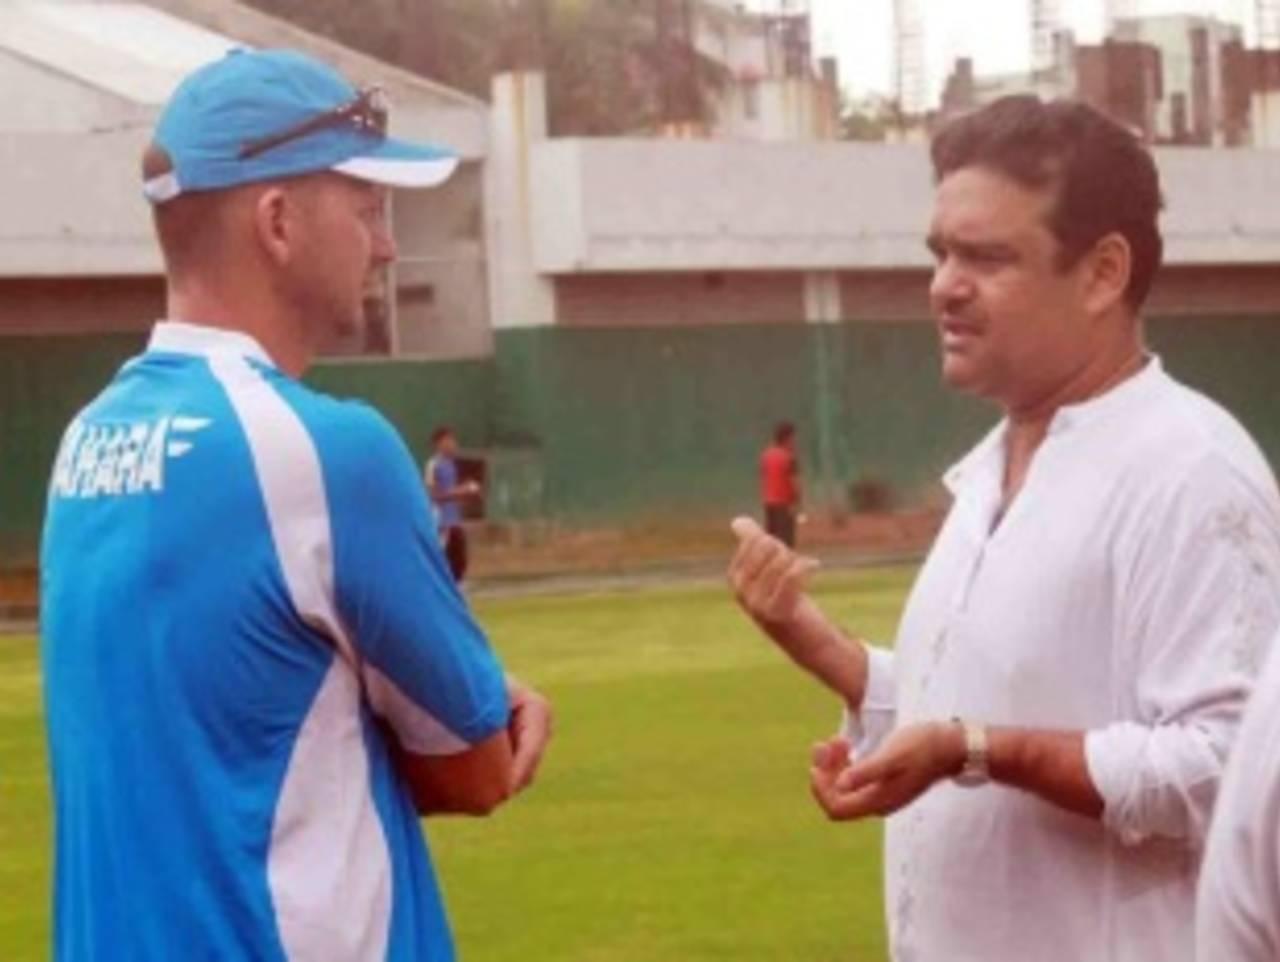 BCB director Akram Khan (right) has promised to "reinforce" the security provided to the West Indies Under-19 team&nbsp;&nbsp;&bull;&nbsp;&nbsp;BCB